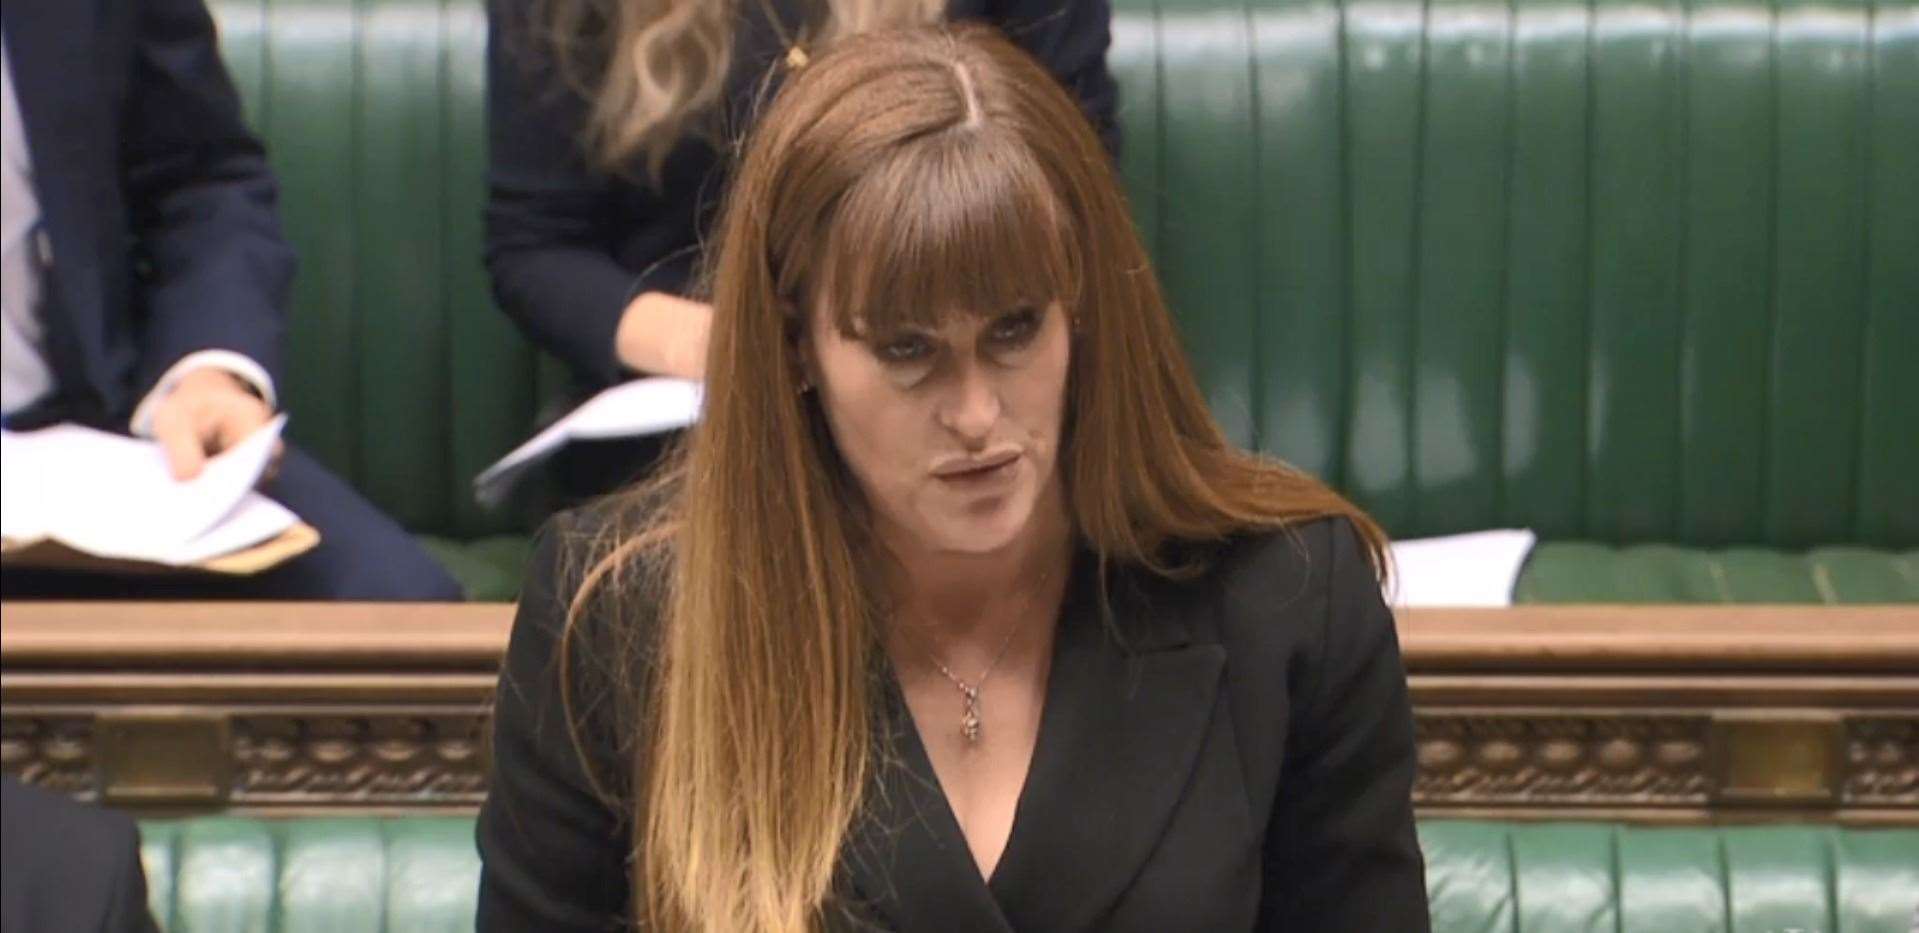 MP Kelly Tolhurst giving a statement in parliament. Picture: Parliamentlive.tv